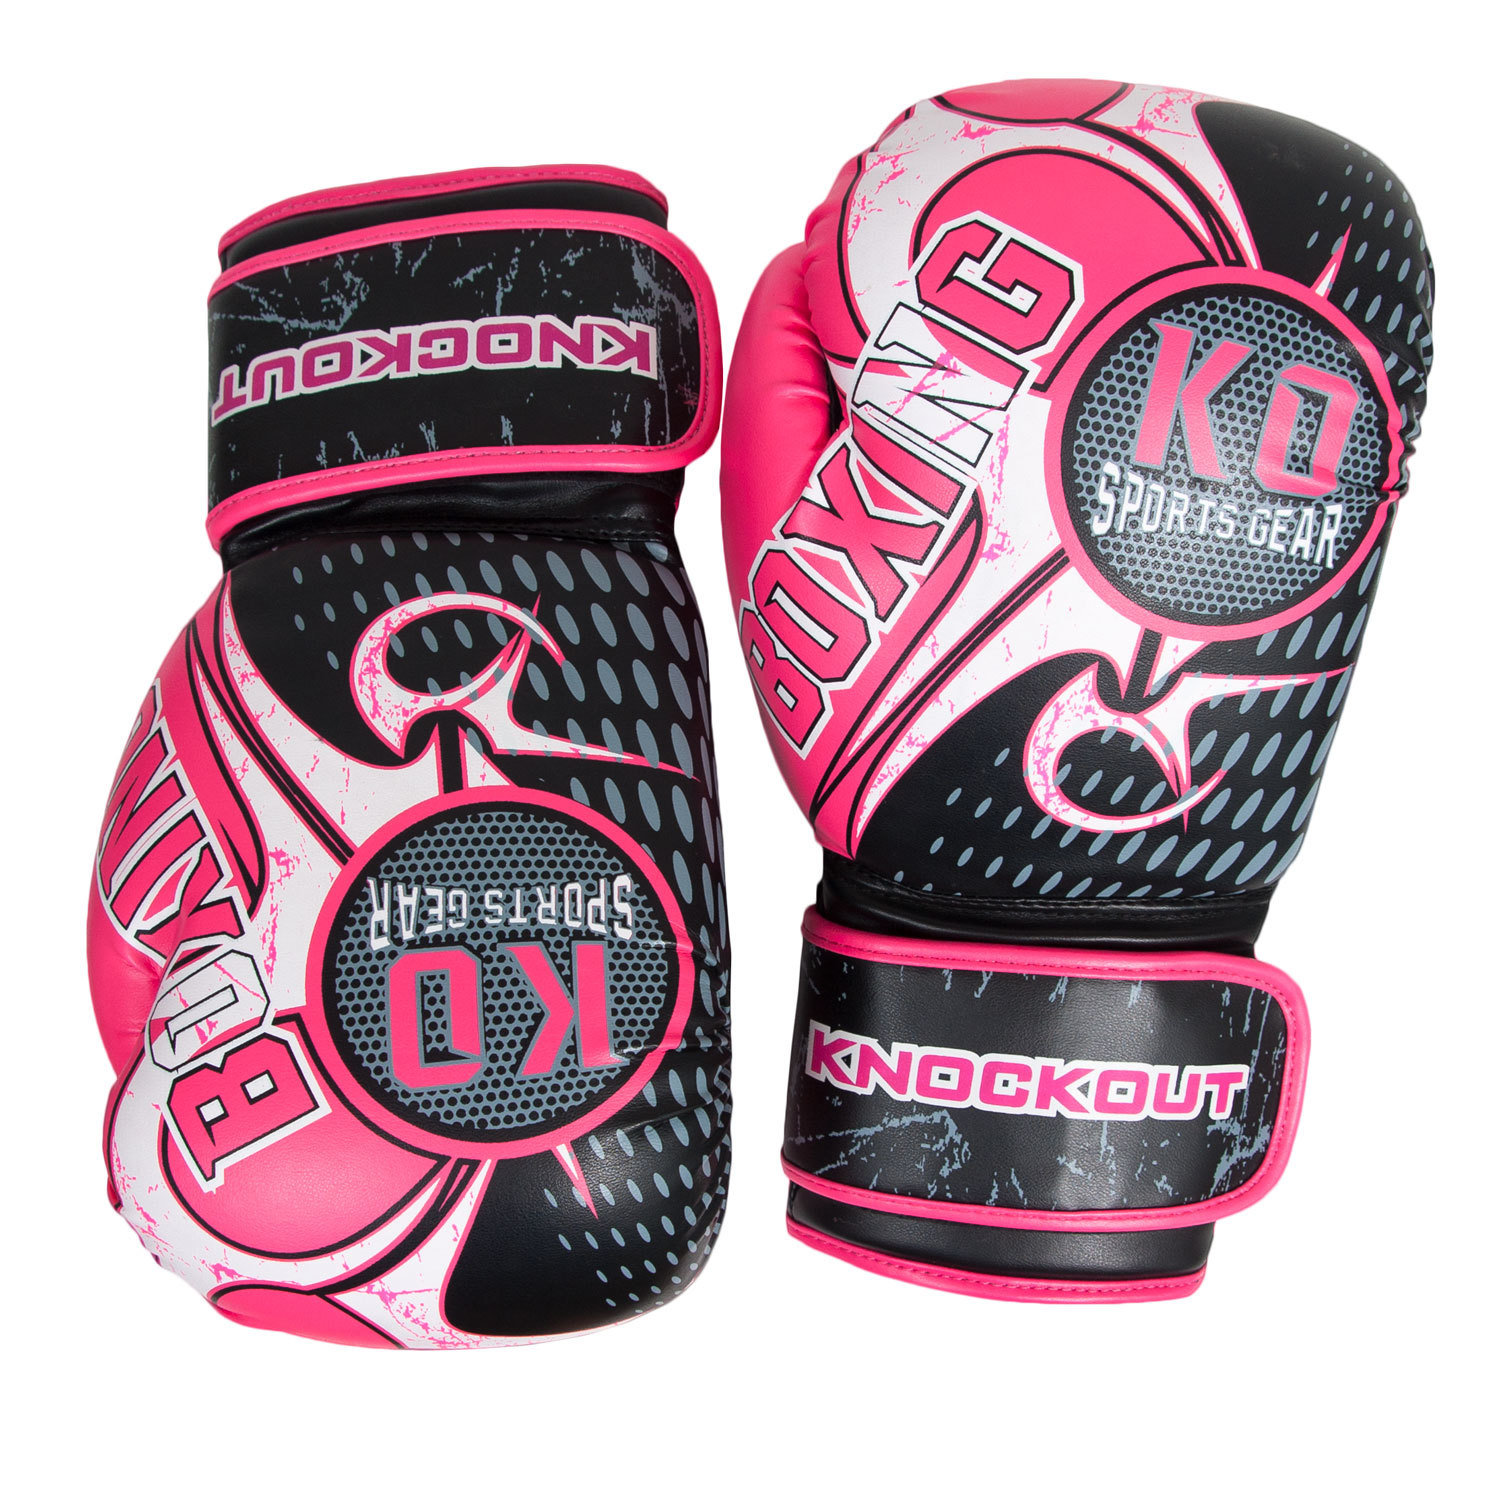 Adult 16oz KO Sports Gear's Boxing Gloves 